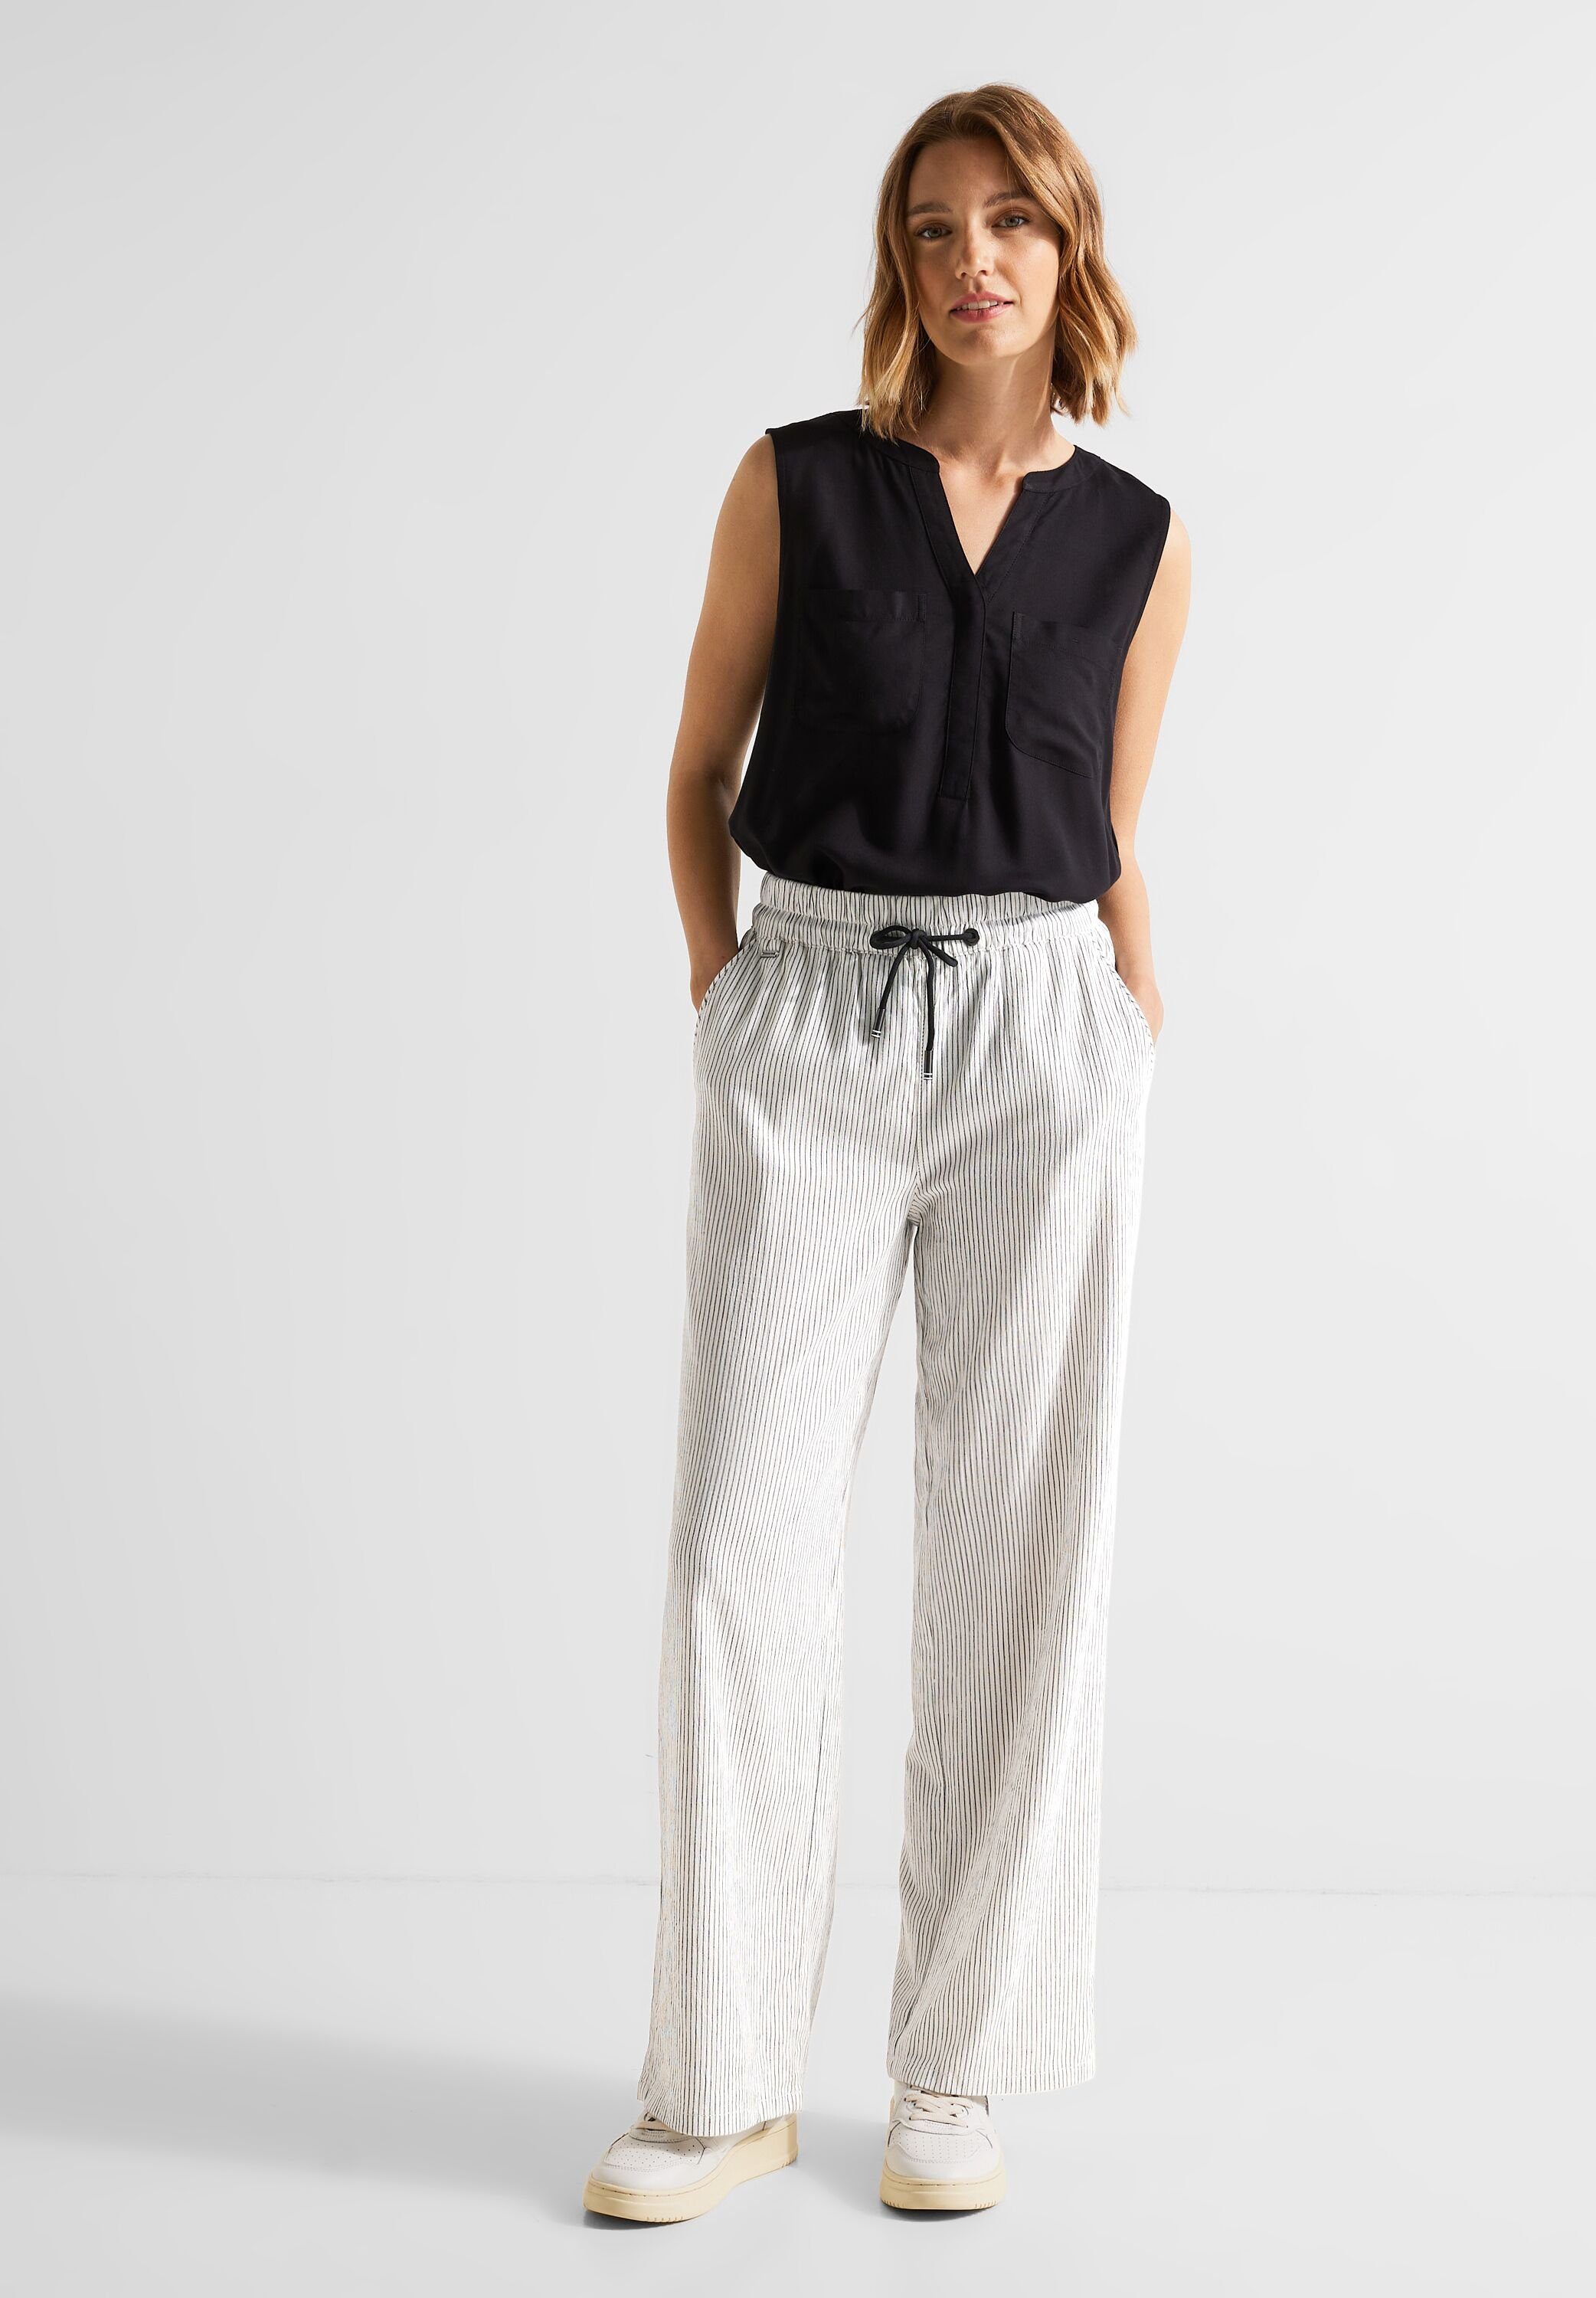 Culotte Materialmix STREET softer ONE